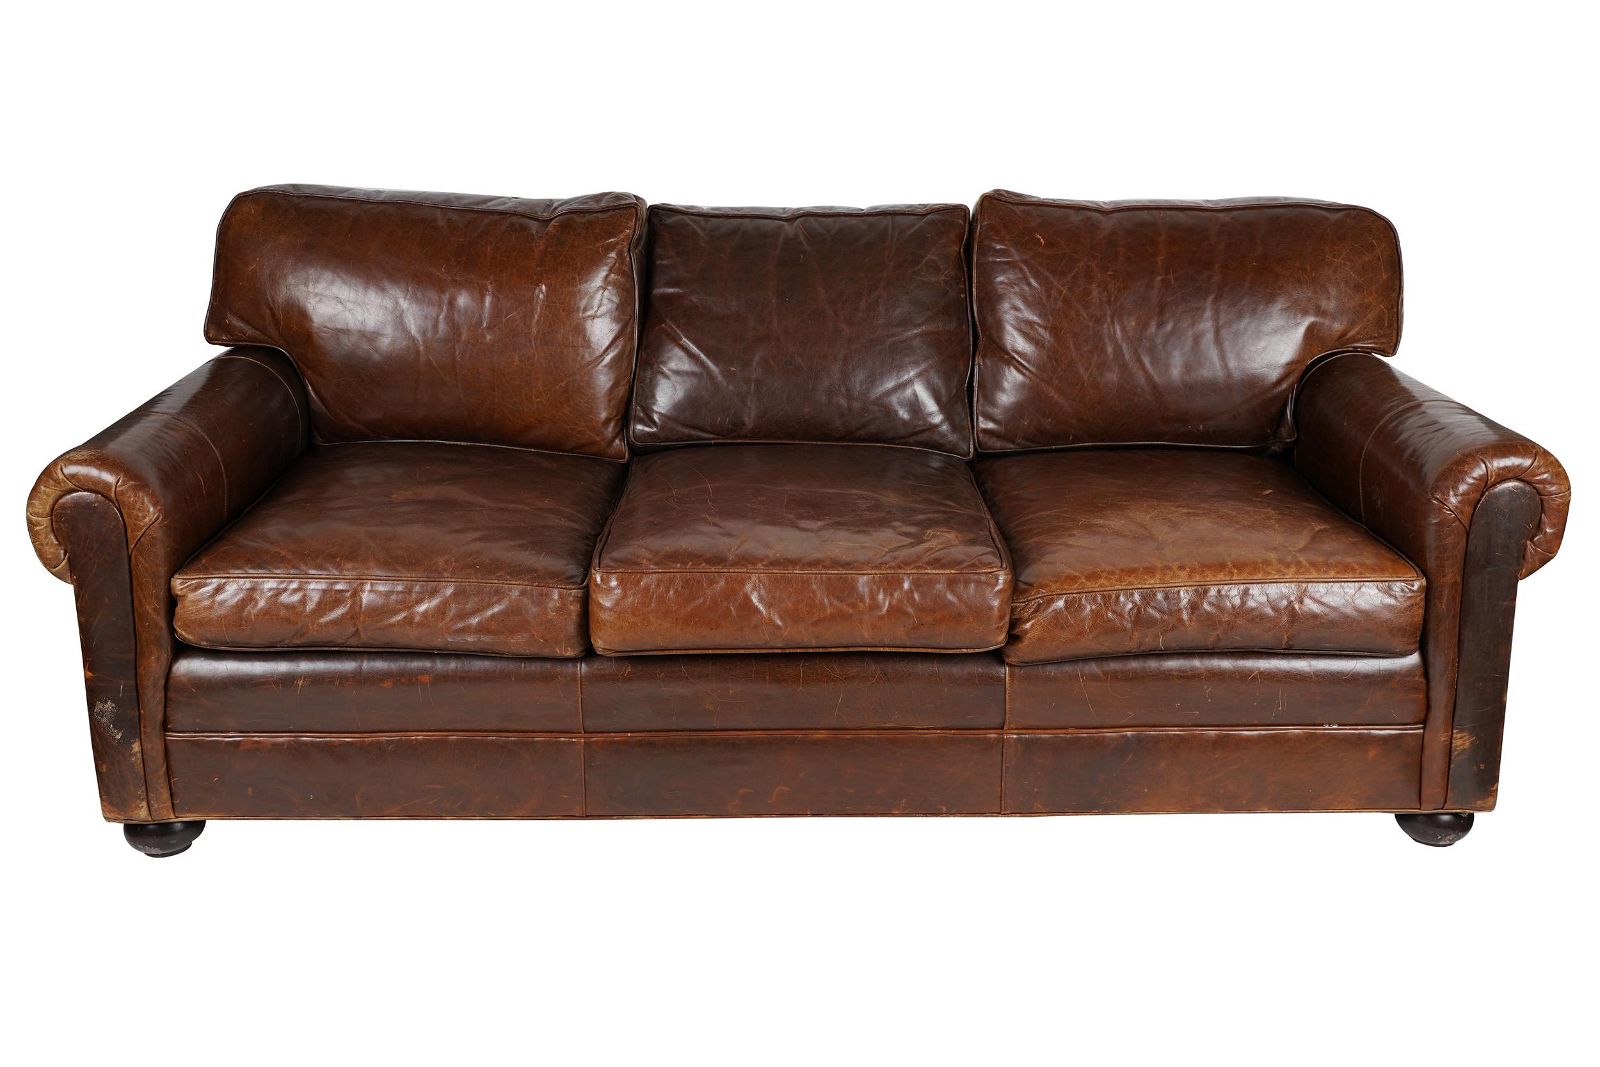 DISTRESSED BROWN LEATHER SOFAthe